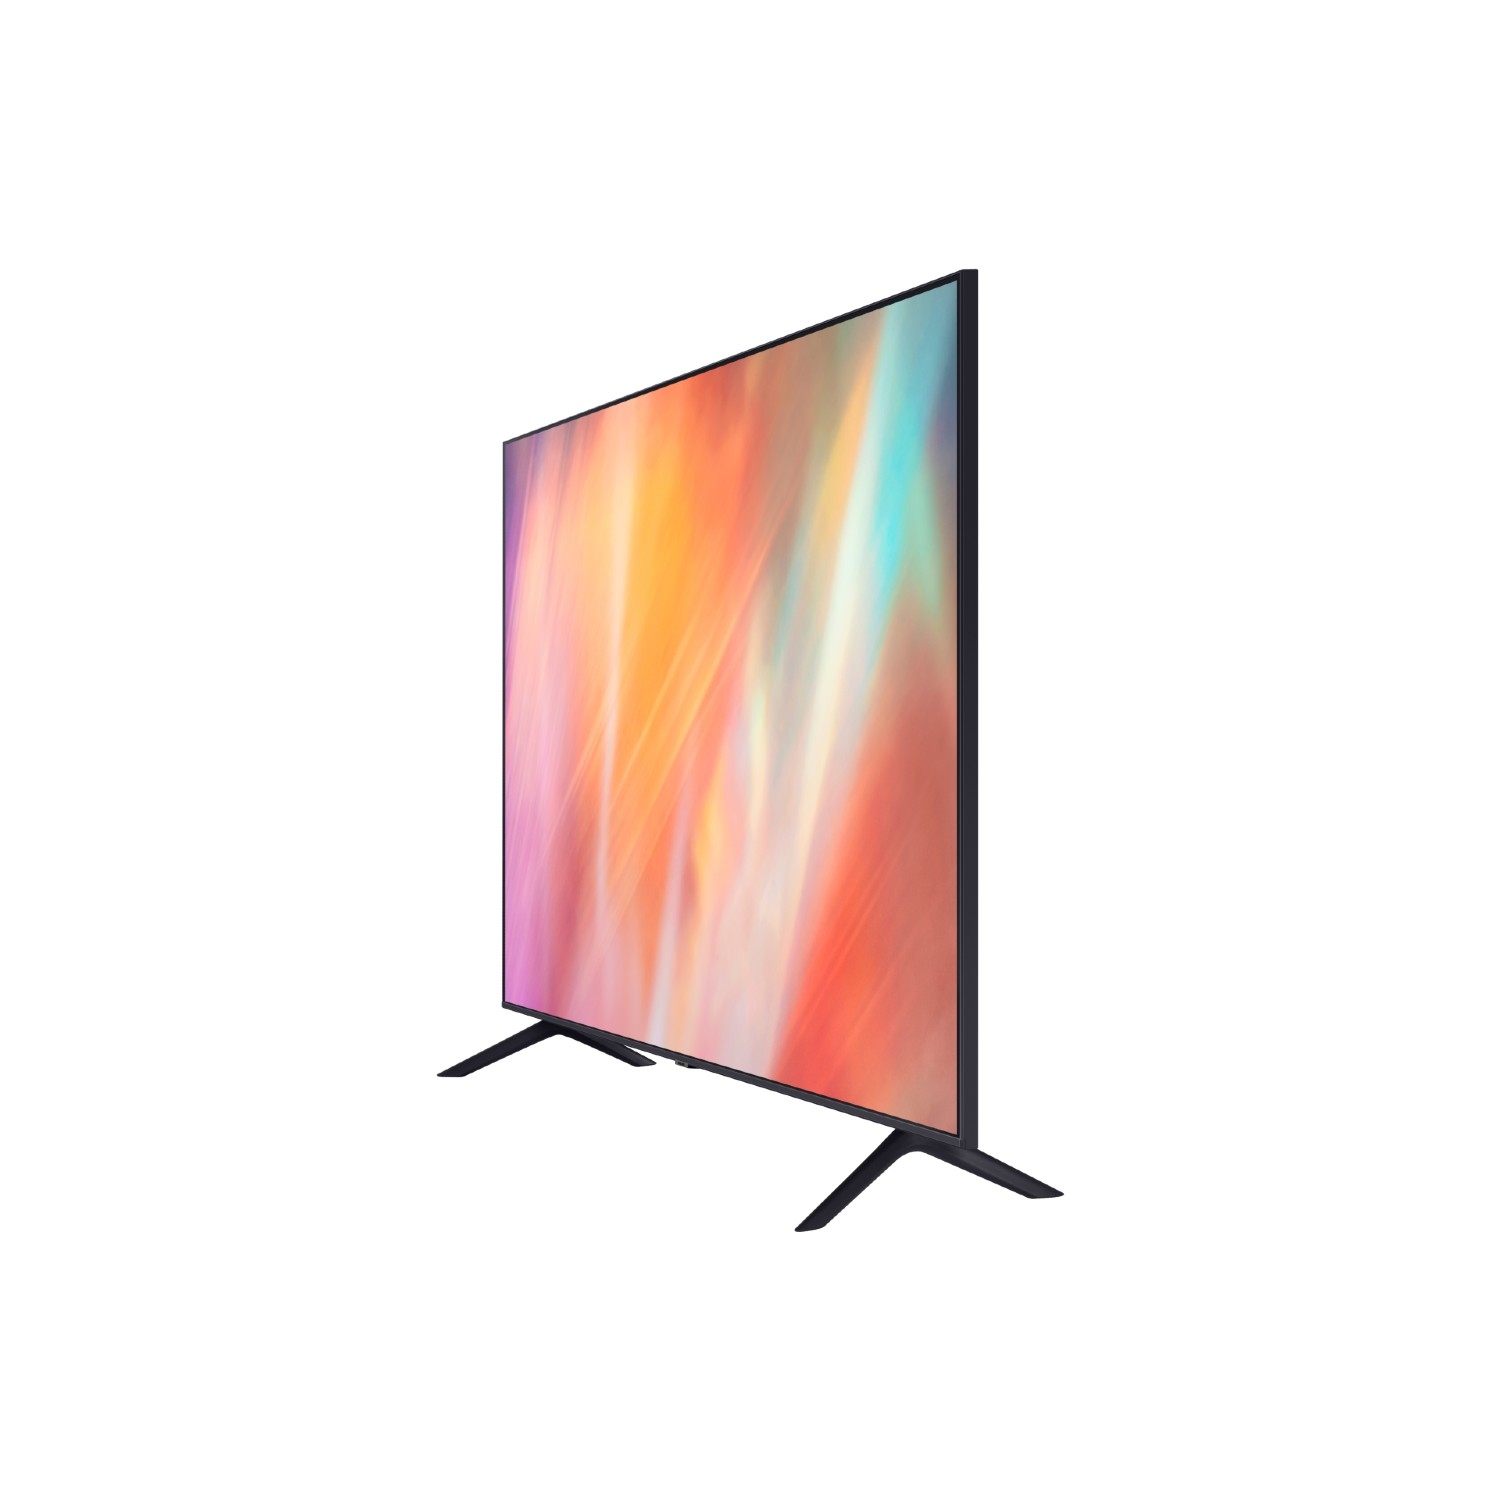 Samsung UE50AU9000KXXU 50" 4K UHD HDR Smart TV Dynamic Crystal Colour with Motion Xcelerator Turbo and Object Tracking Sound LITE - 7